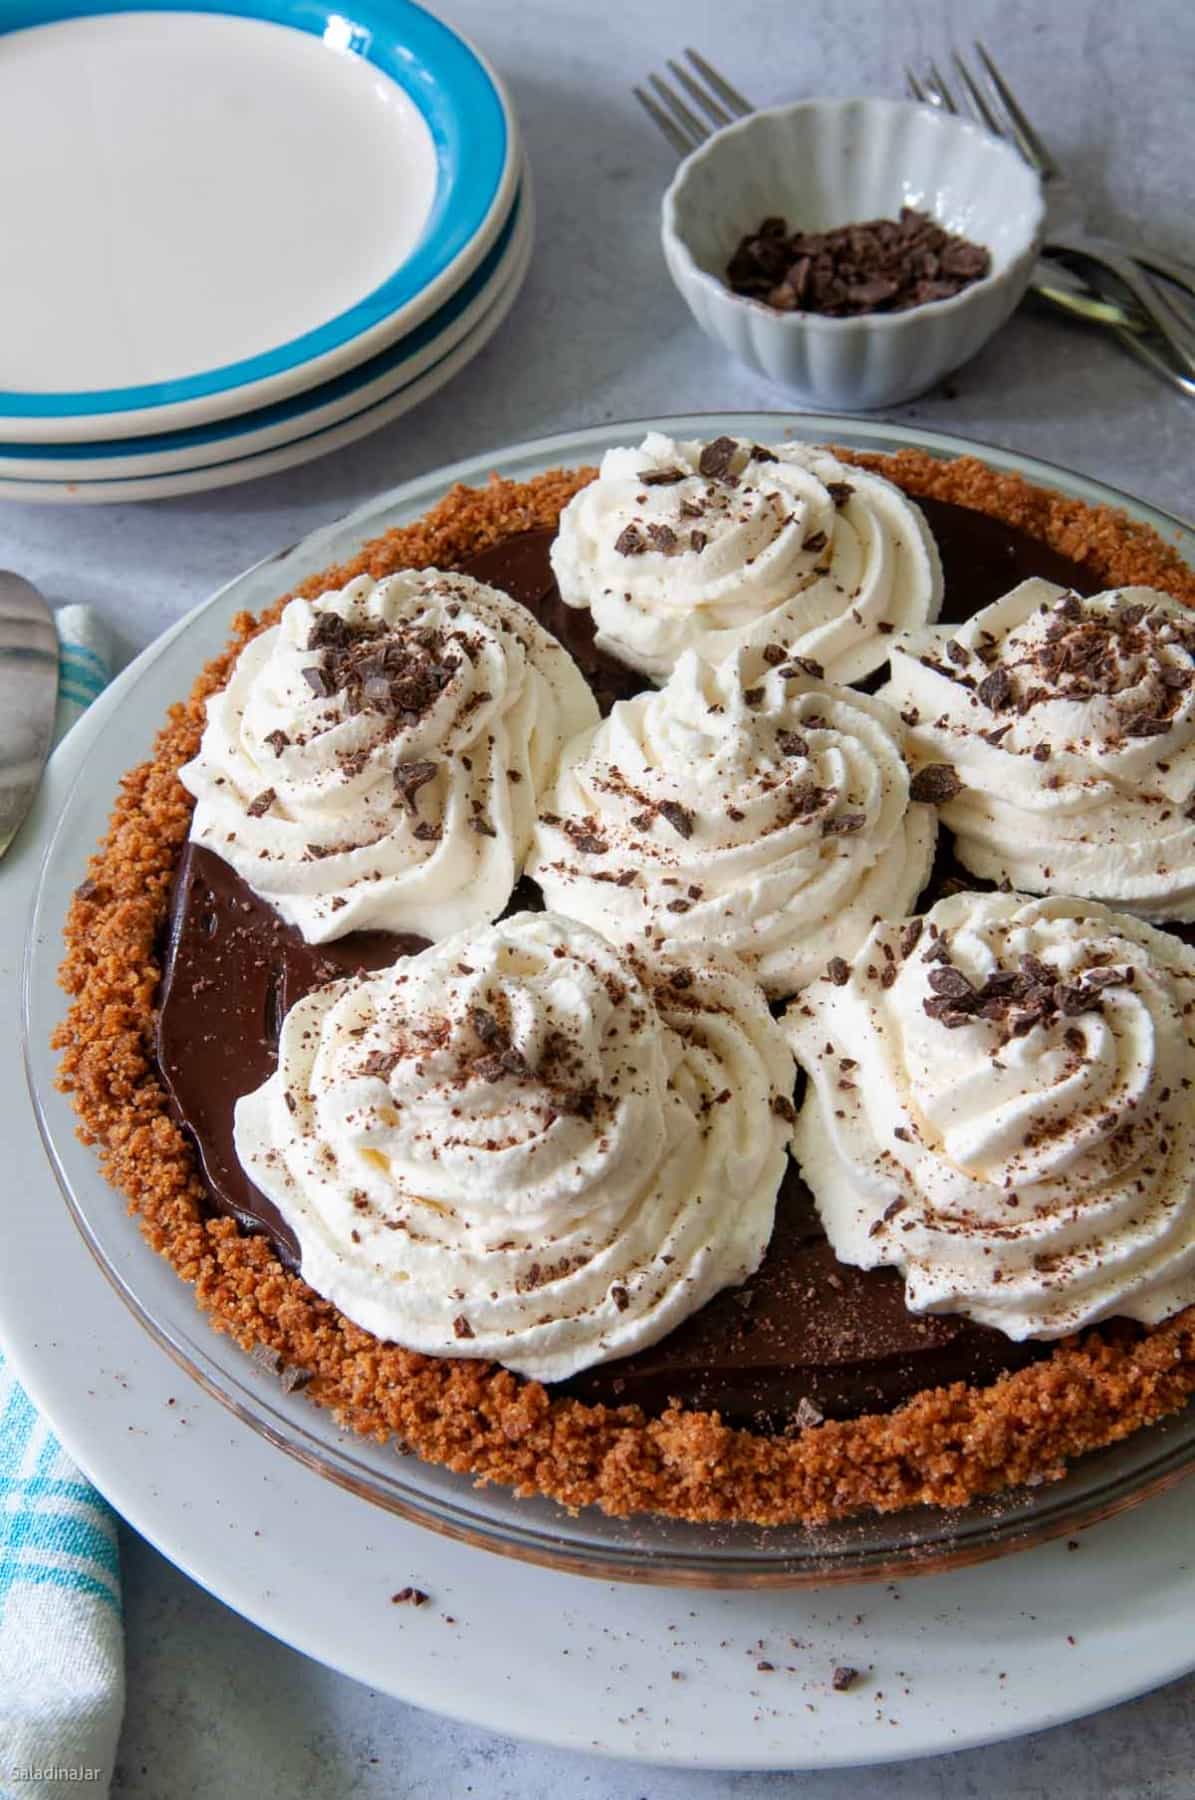 whole microwave chocolate pie with whipped cream and chocolate sprinkles on top